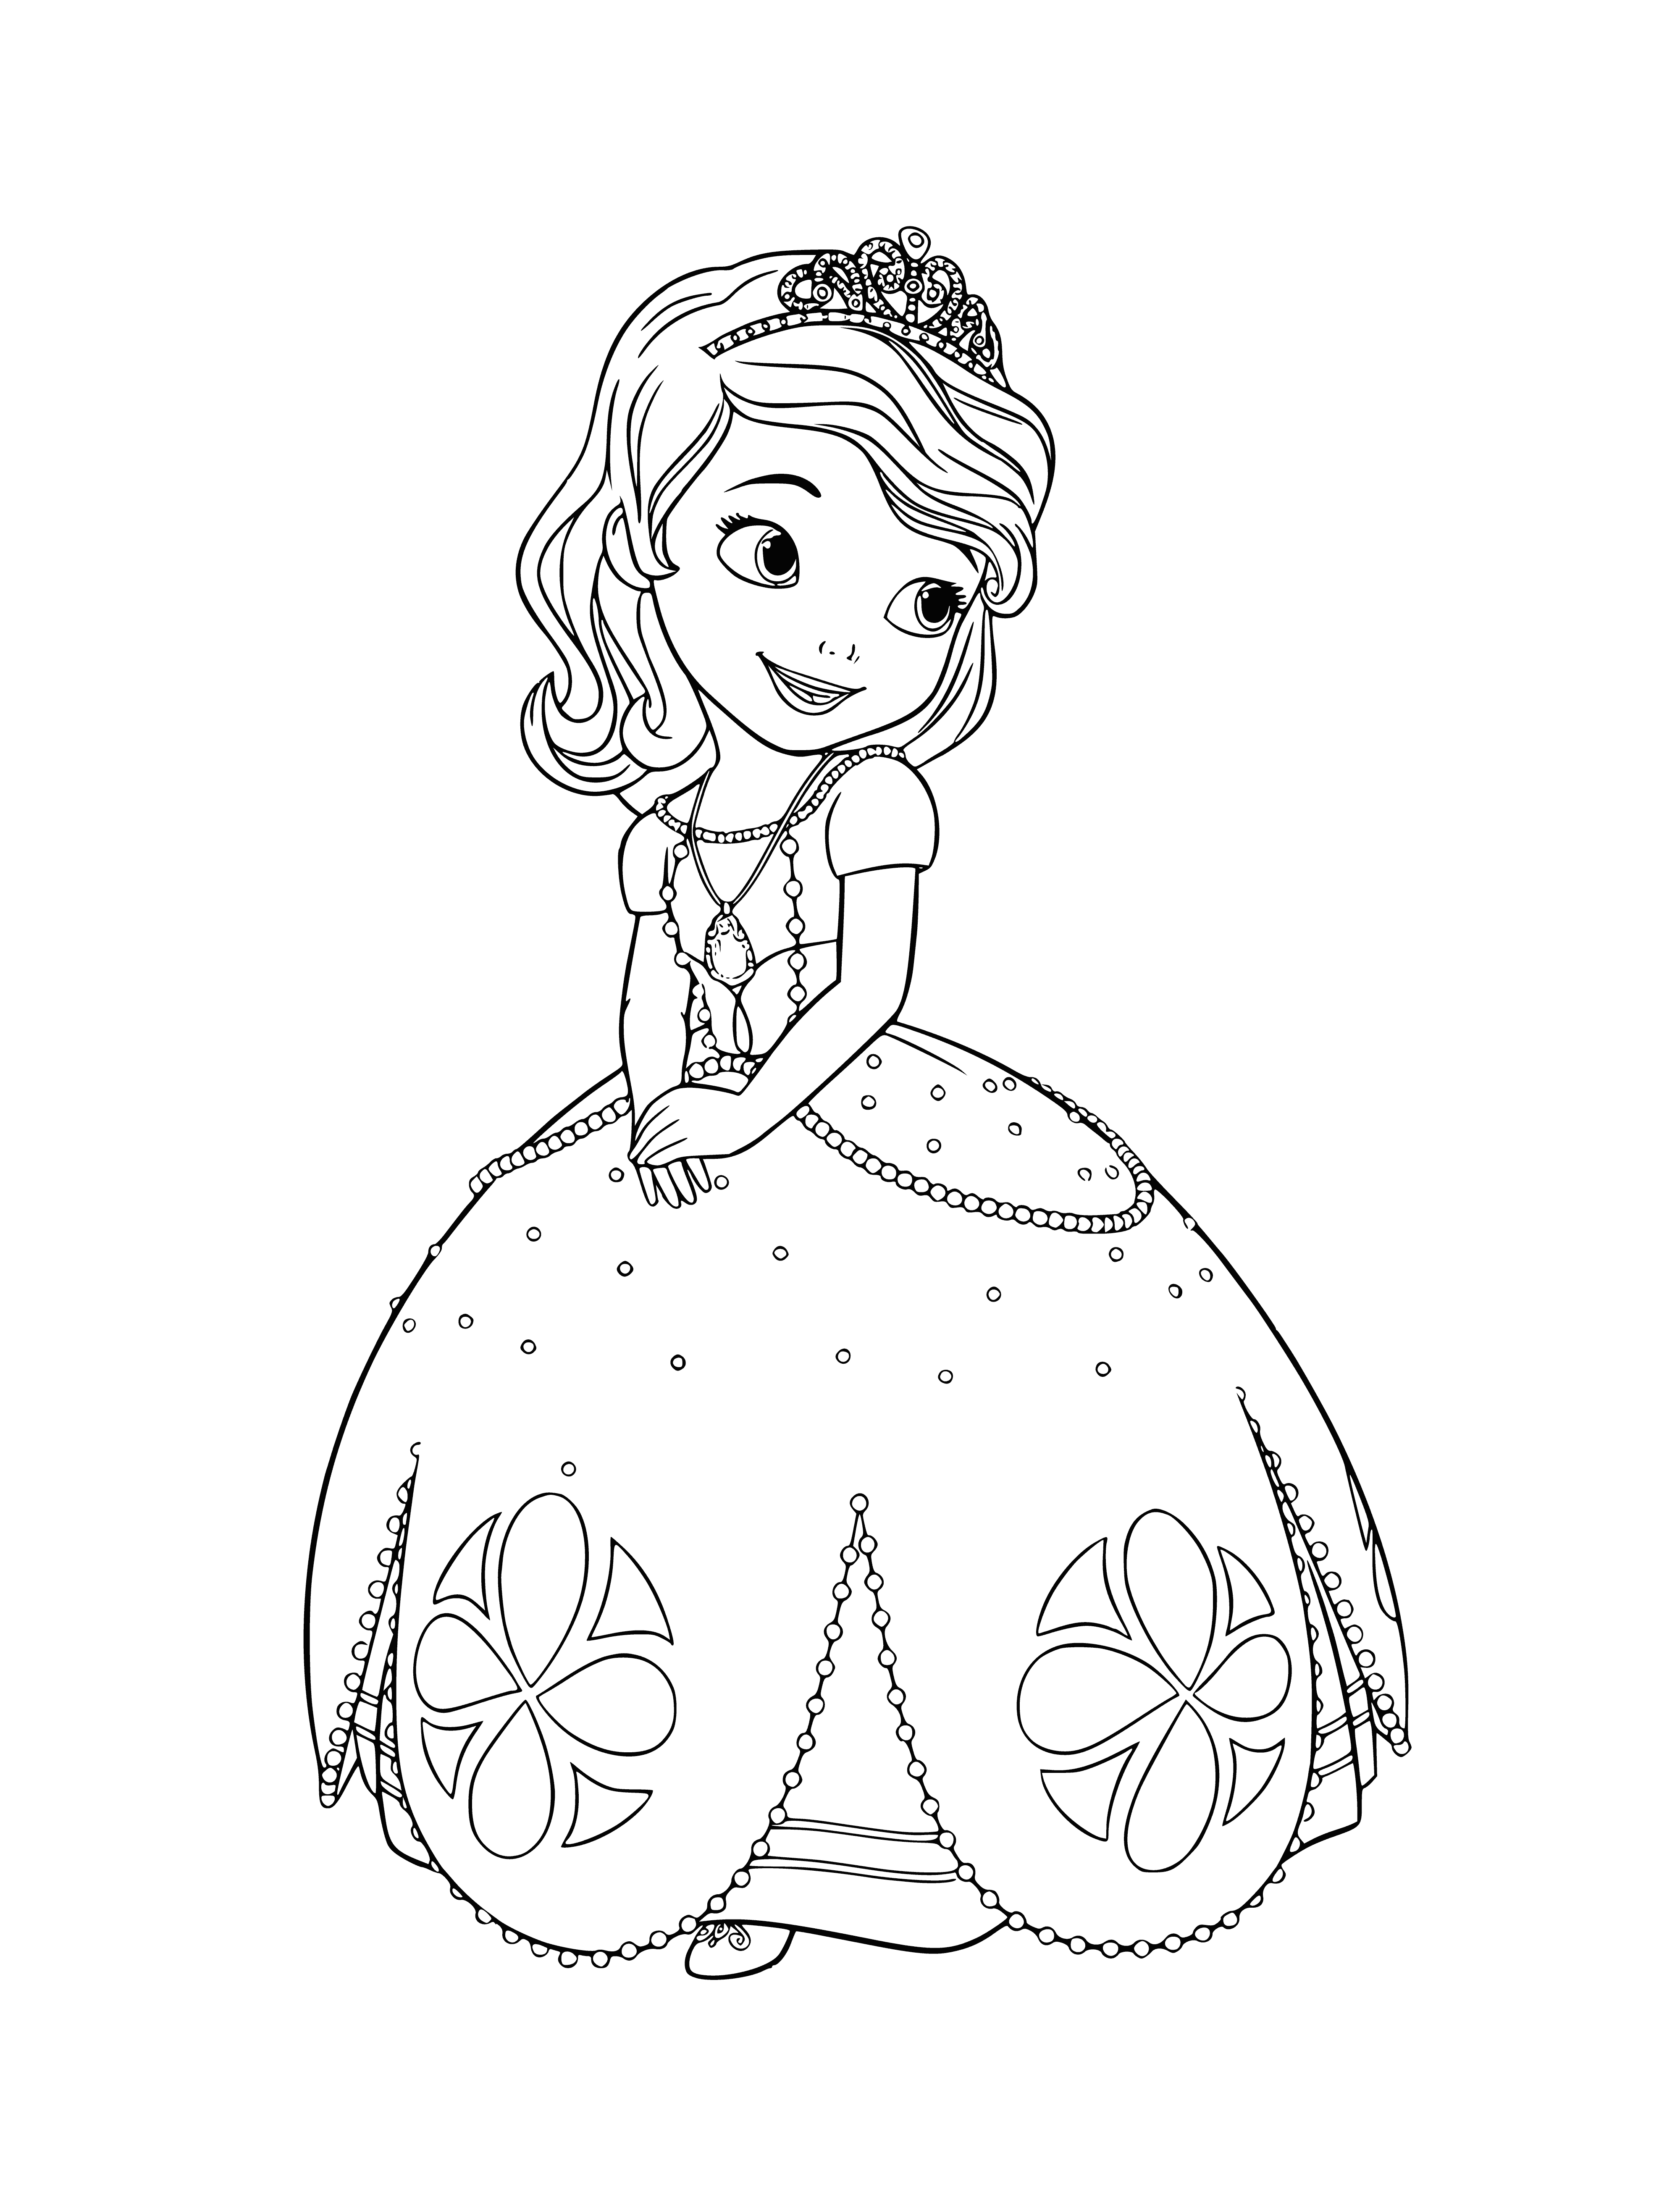 coloring page: Sofia stands in front of a castle in a pink dress and crown, holding a wand. #PrincessLife